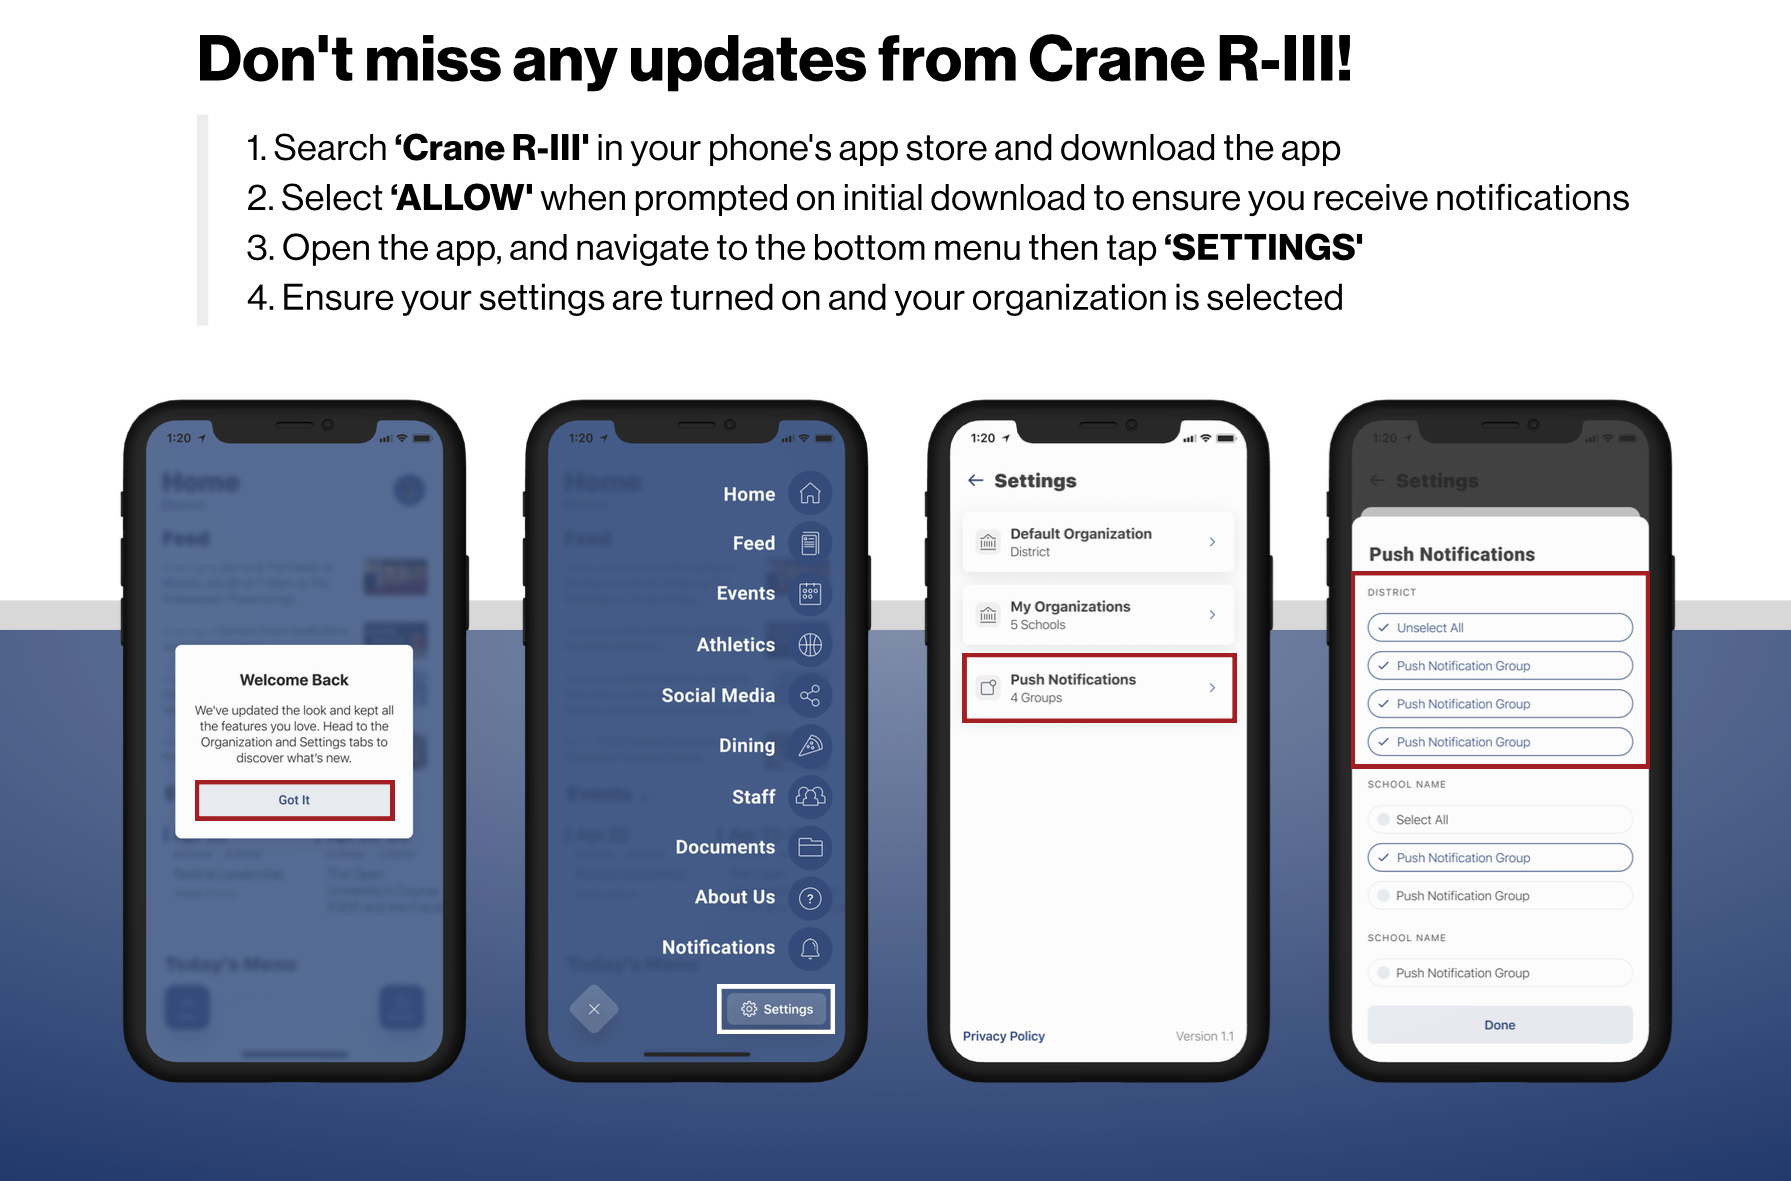 Don't miss any updates from Crane R-III!